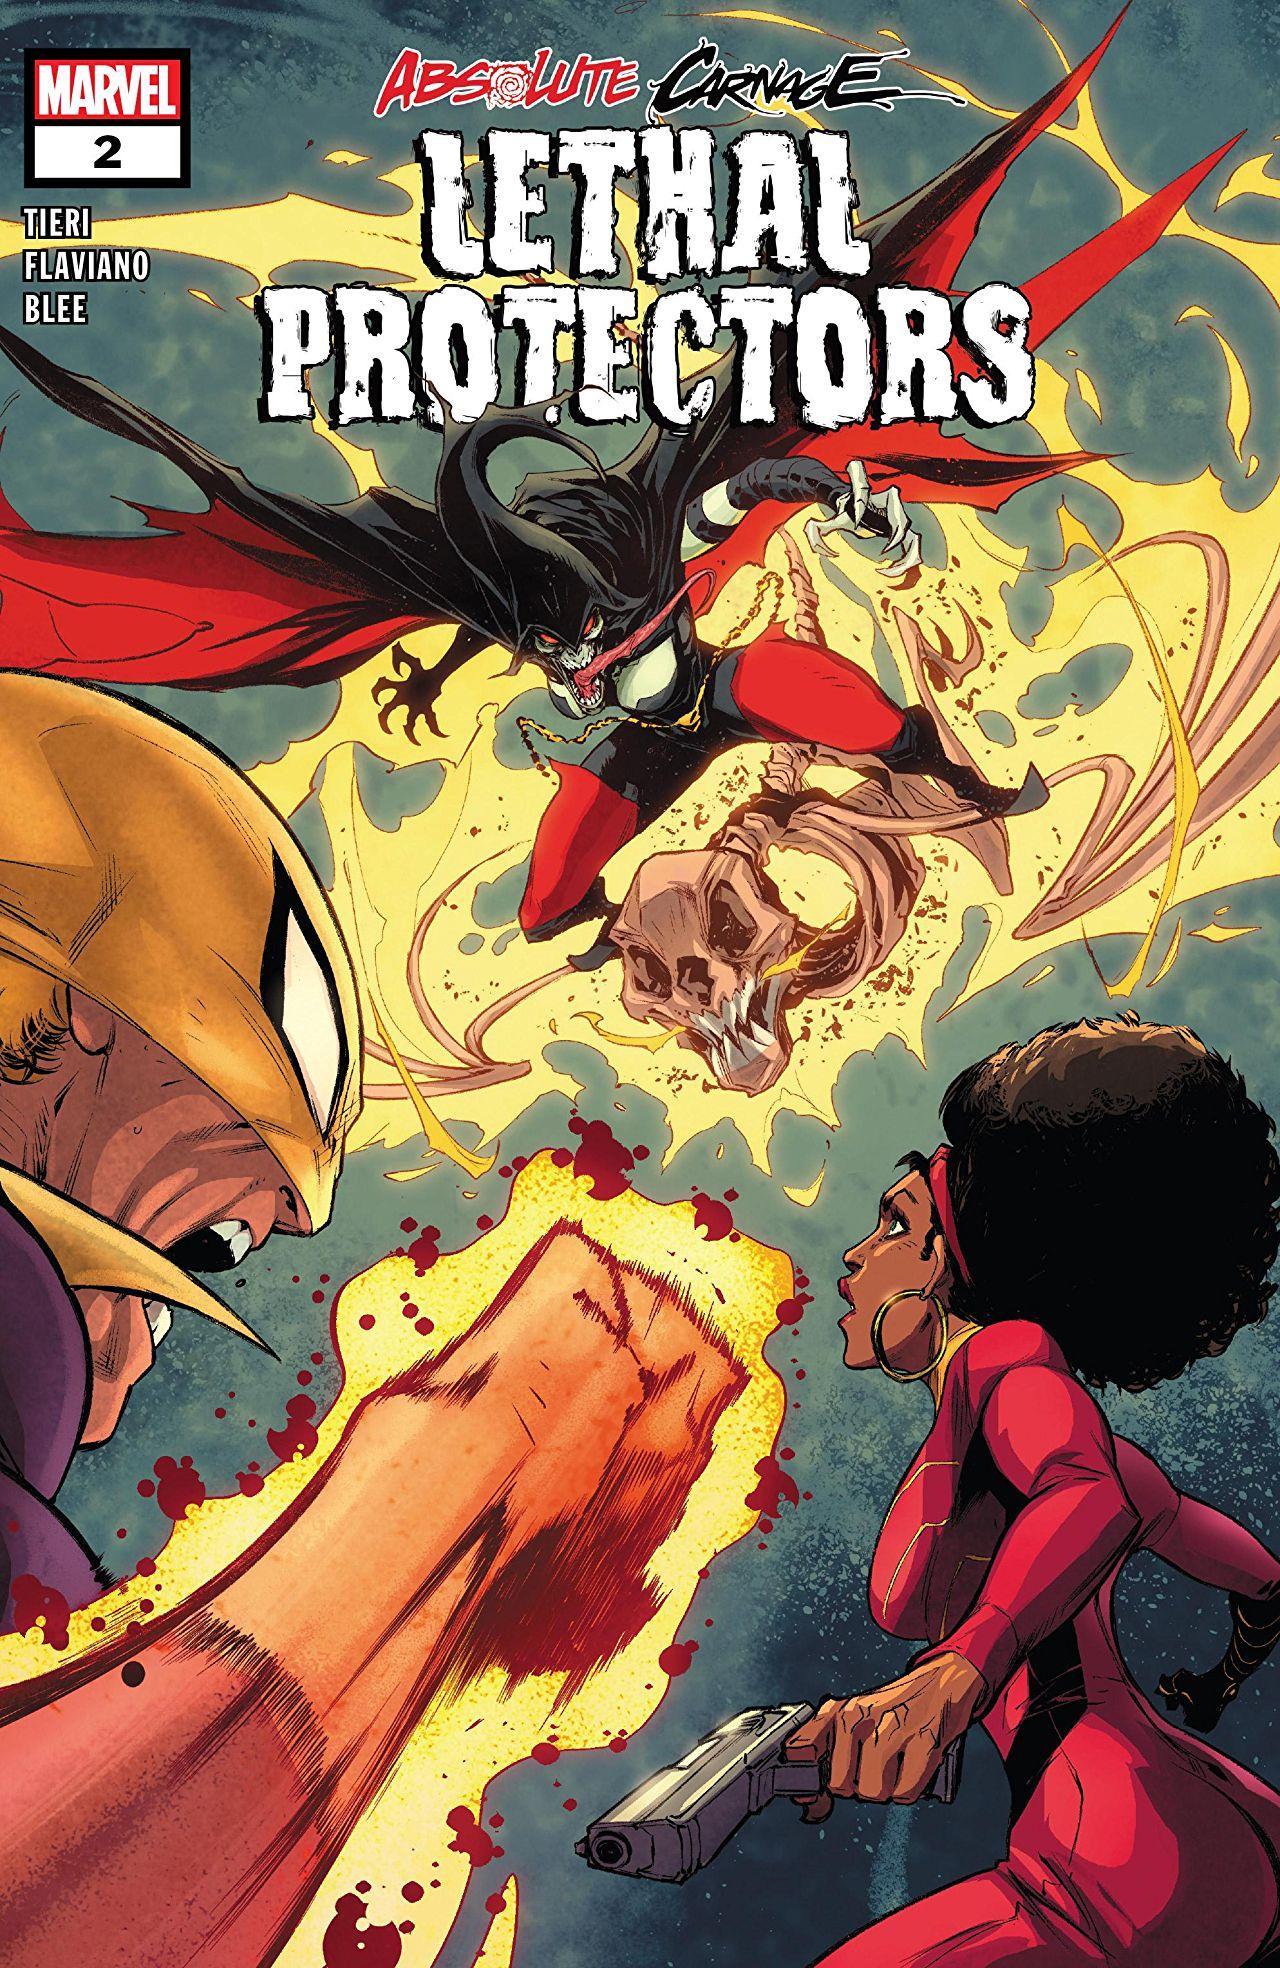 Absolute Carnage: Lethal Protectors Vol. 1 #2